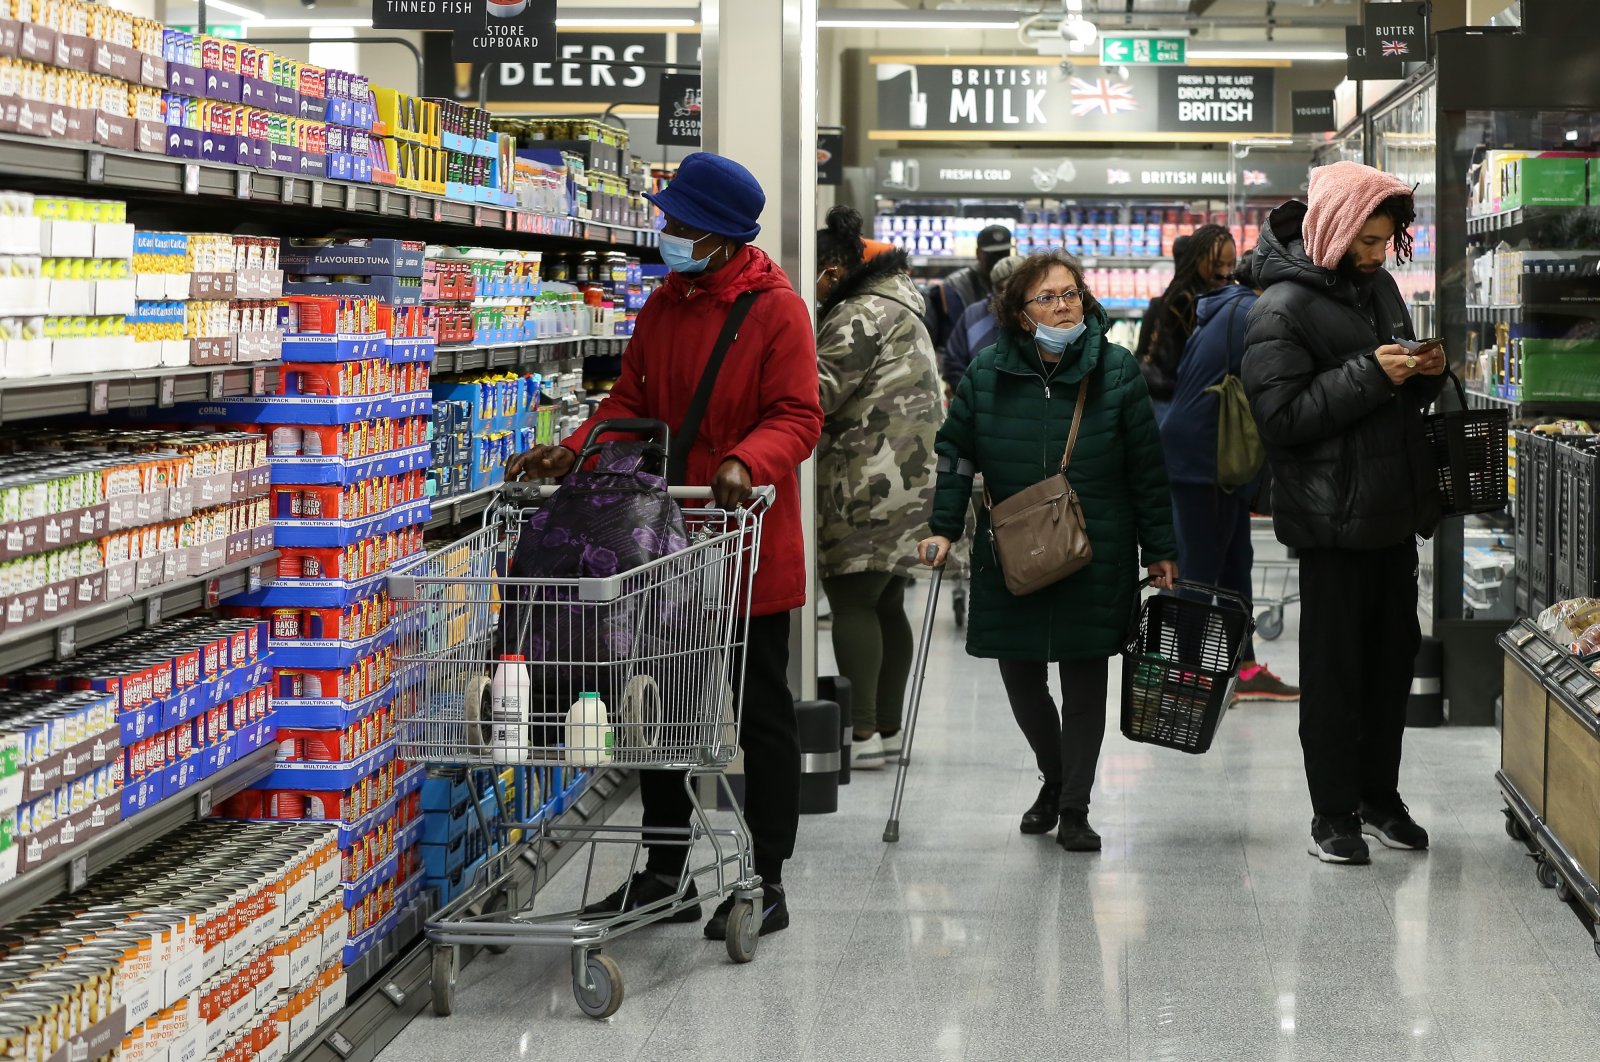 Shoppers are seen in a supermarket in London, U.K., Nov. 5, 2021. (Reuters Photo)